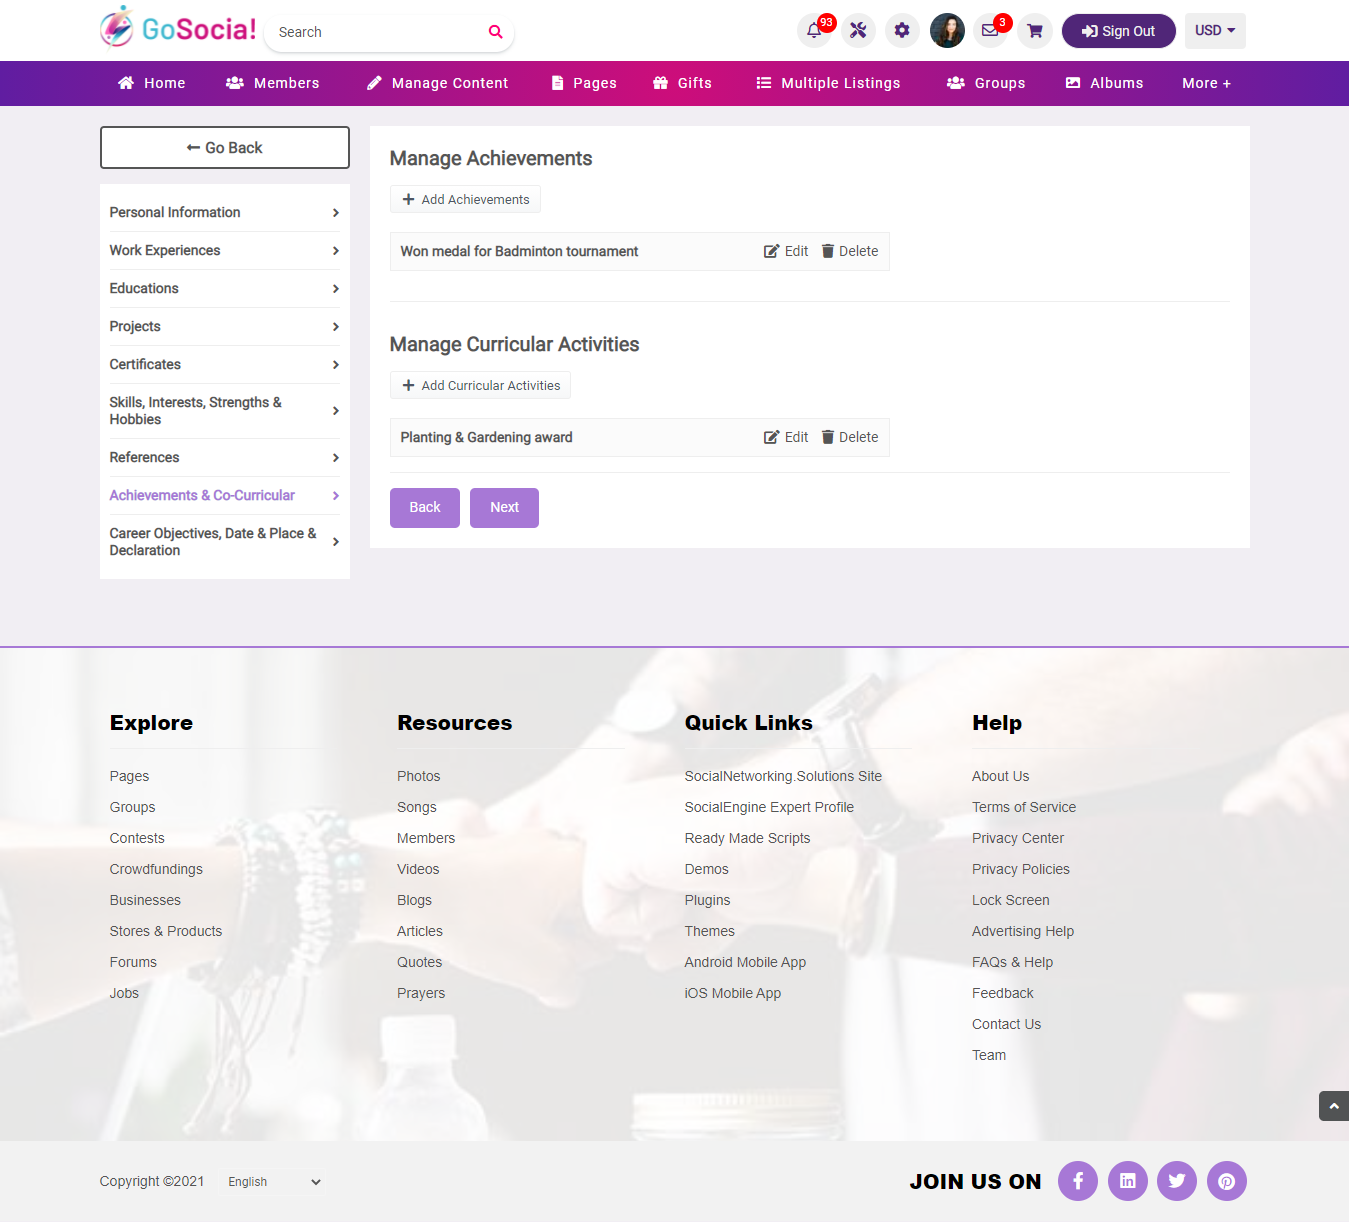 Add Achievements & Co-Curricular Page